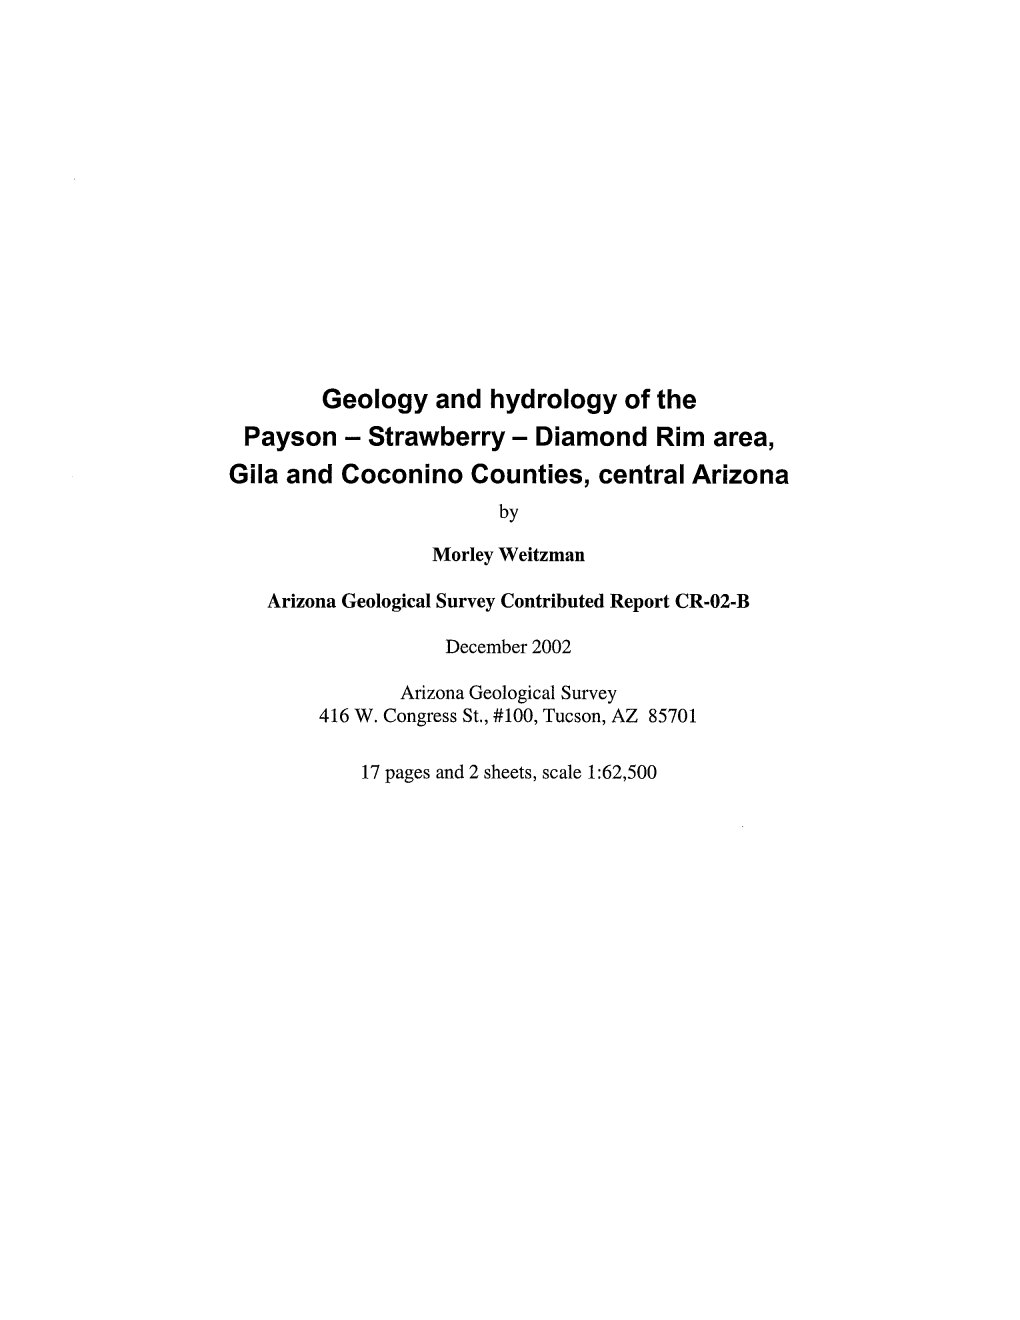 Geology and Hydrology of the Payson - Strawberry - Diamond Rim Area, Gila and Coconino Counties, Central Arizona By